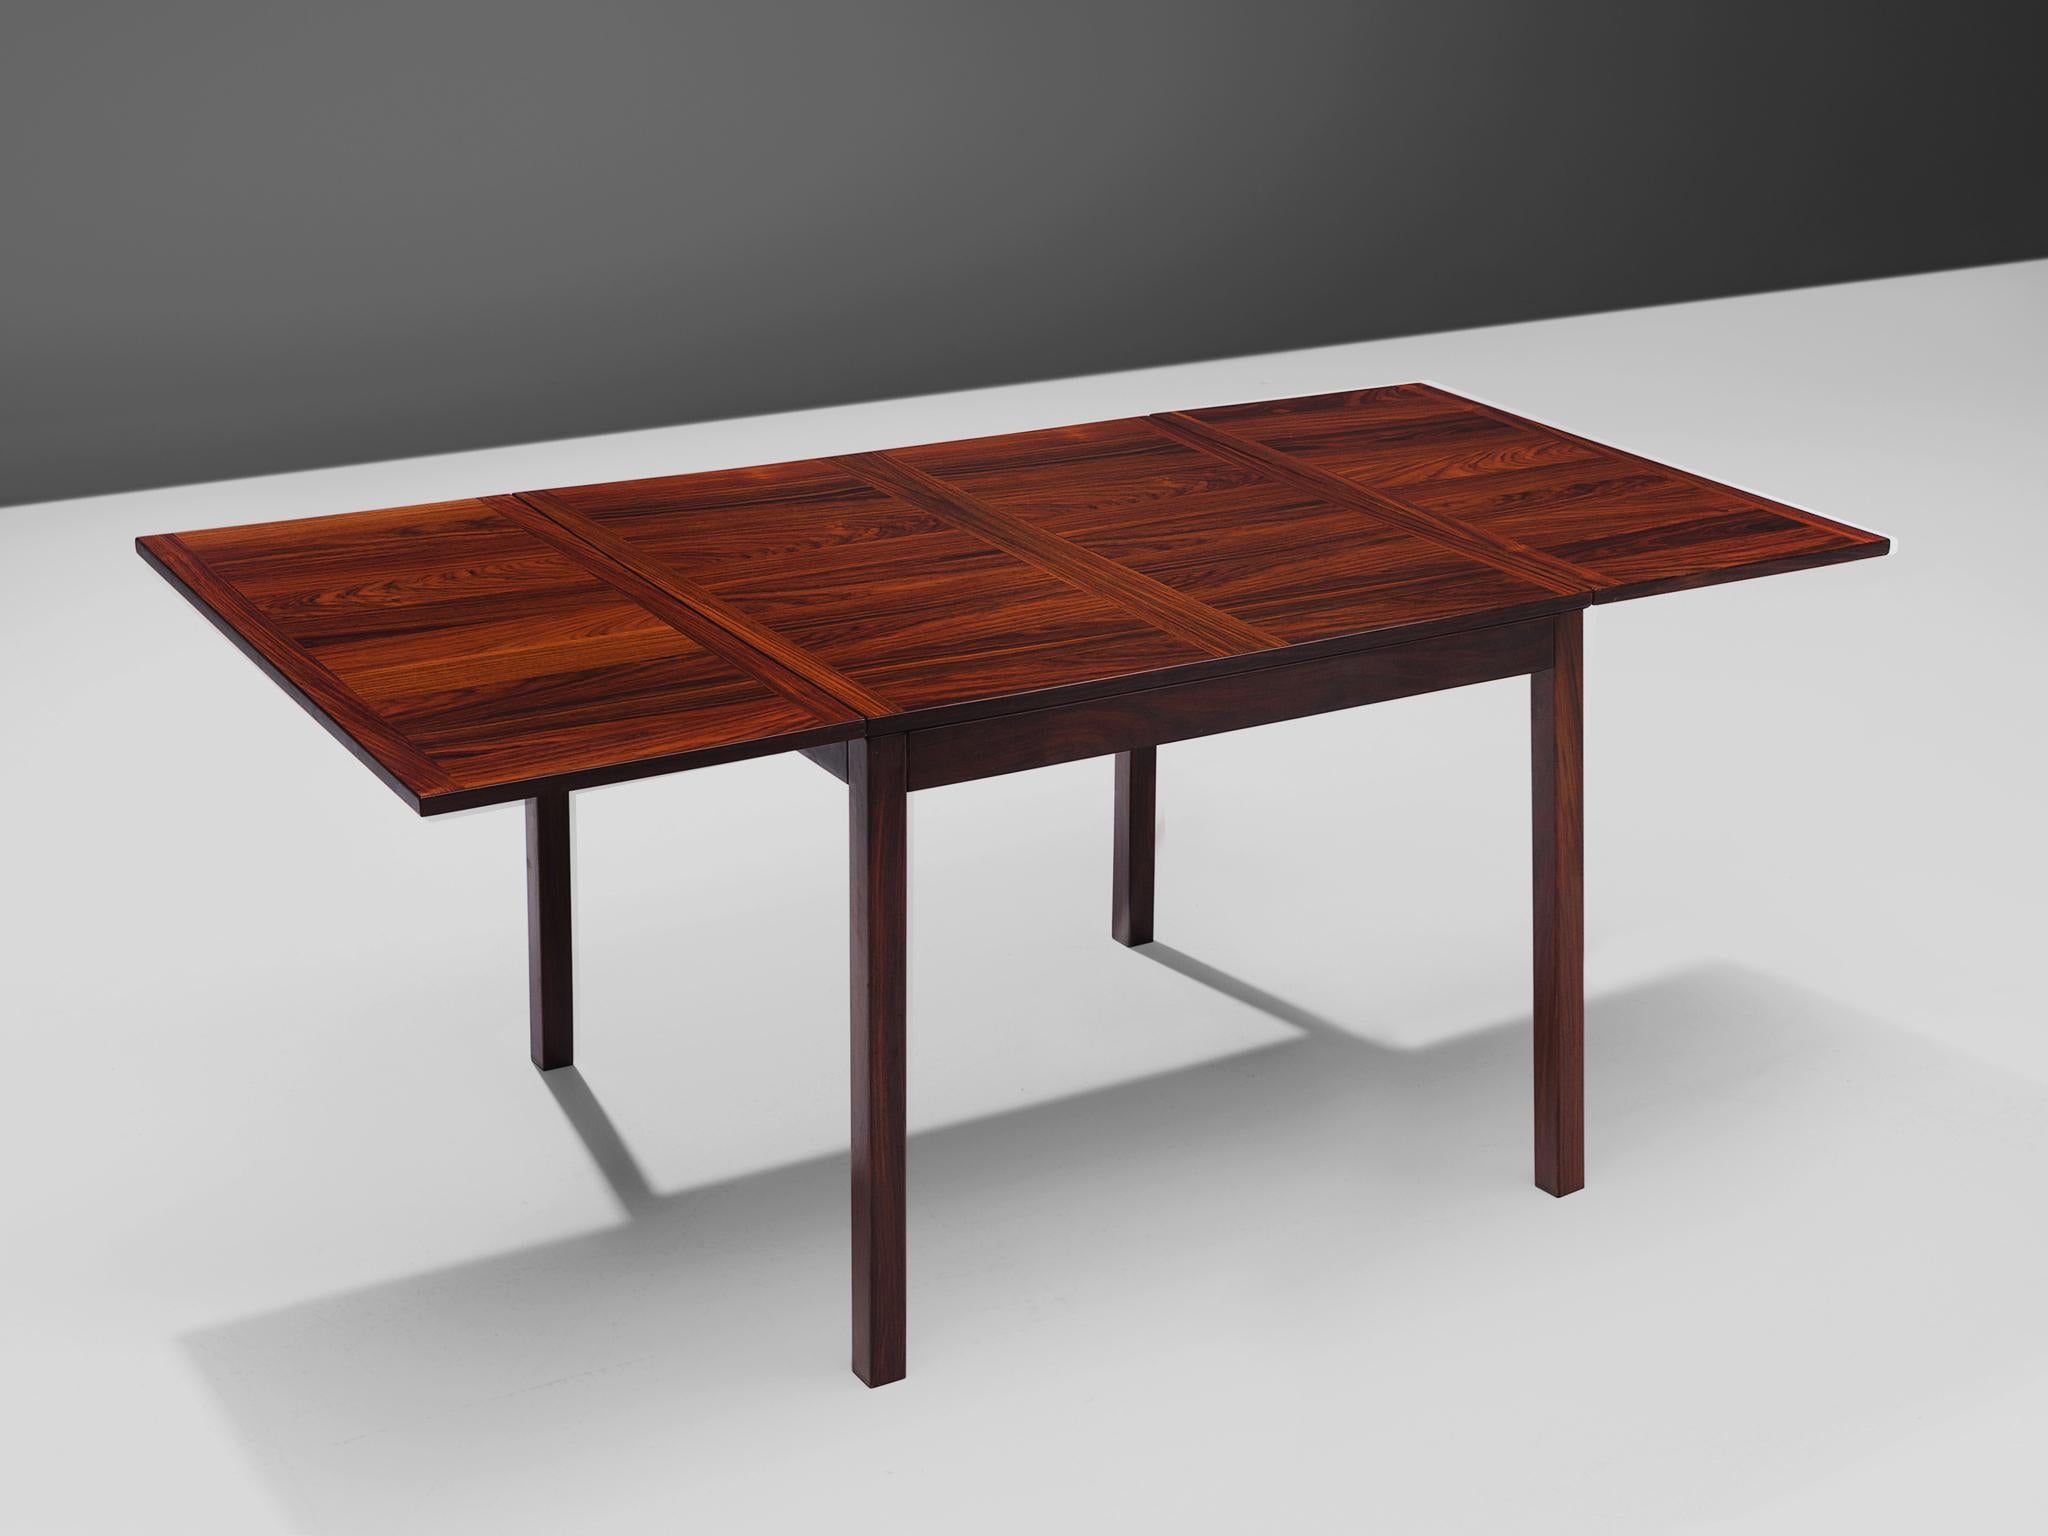 Vejle Stole Møbelfabrik, extendable dining table, rosewood, Denmark, 1960s

This Danish dining table is modest in shape and aesthetics. Yet the table is solidly executed and features a geometric inlay on the top. The legs of the table a completely